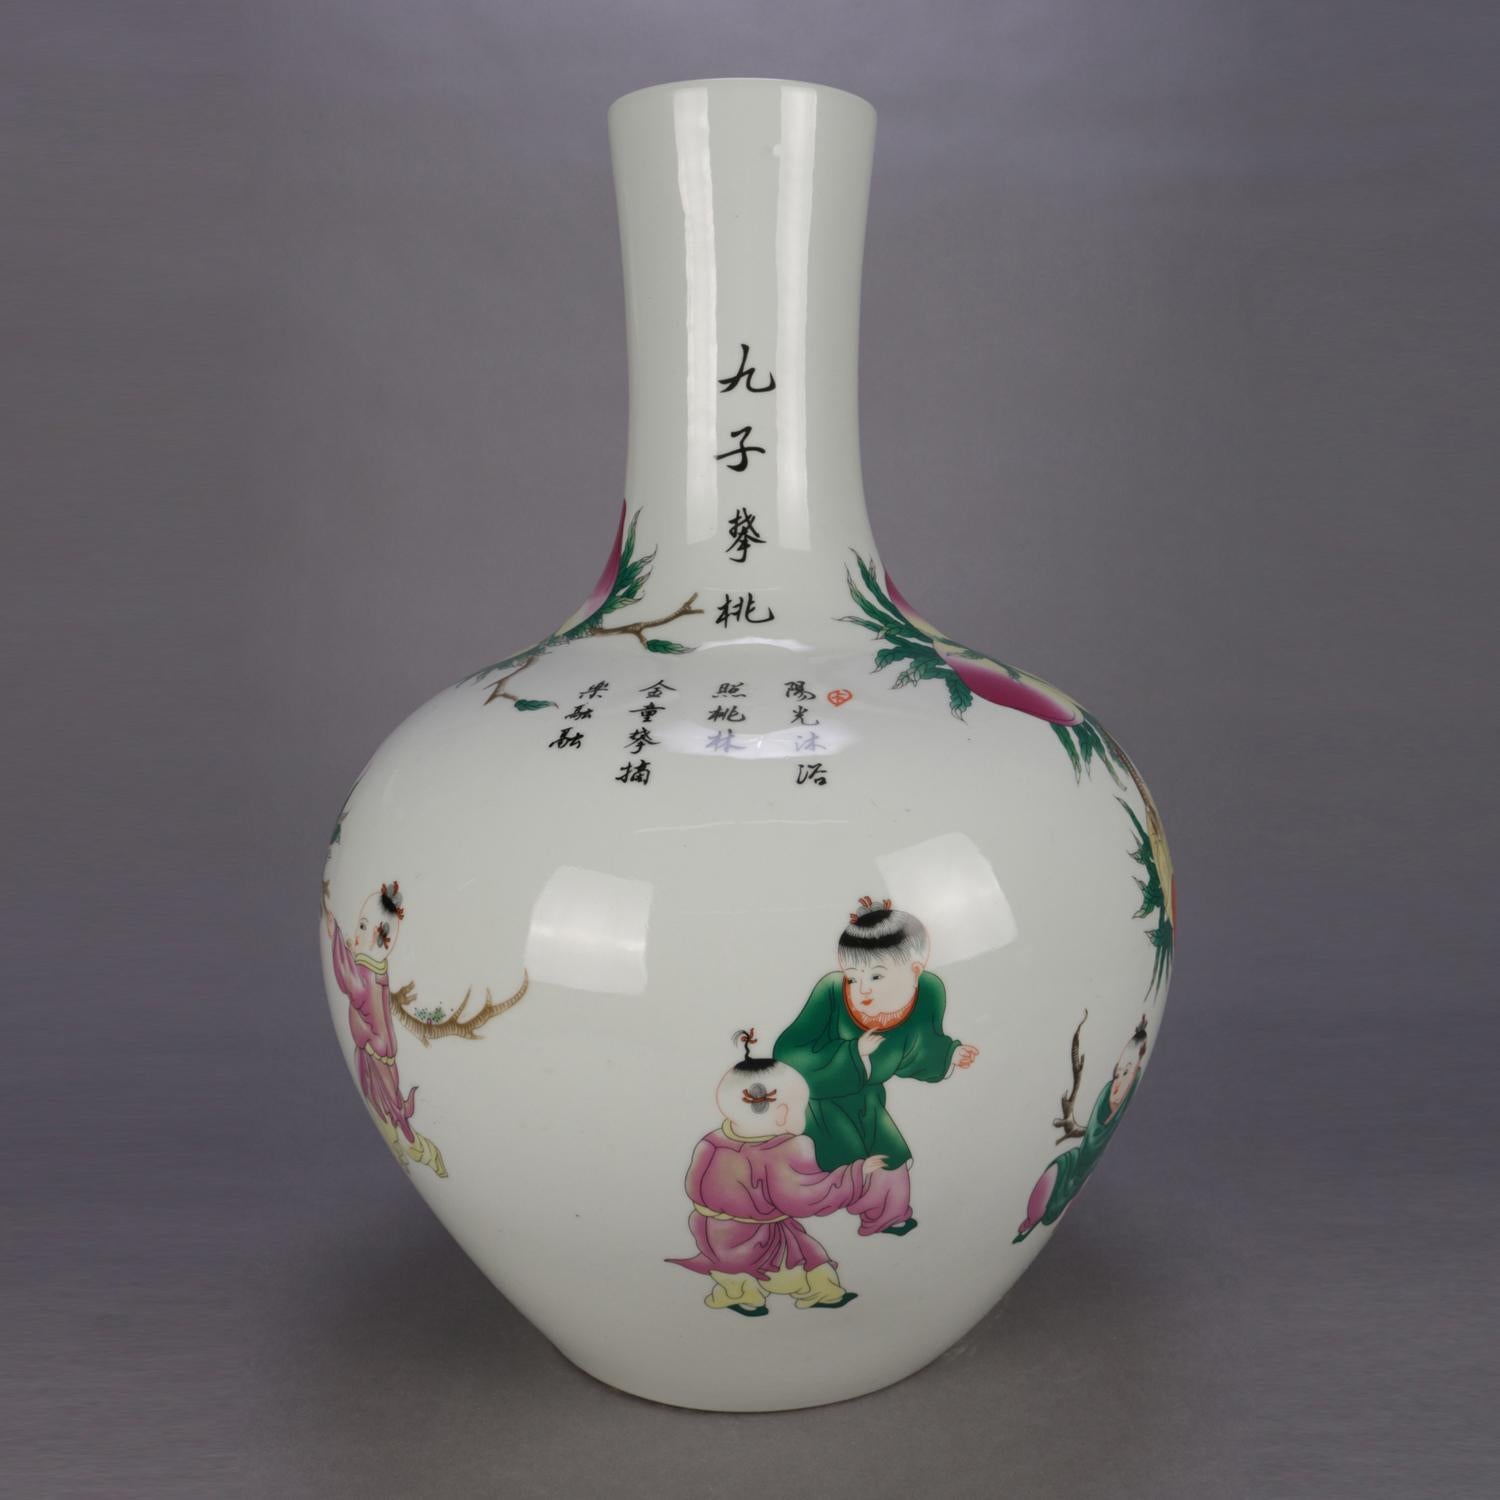 Hand-Painted Oversized Antique Chinese Hand Painted Bulbous Vase, Tree & Figures 20th Century